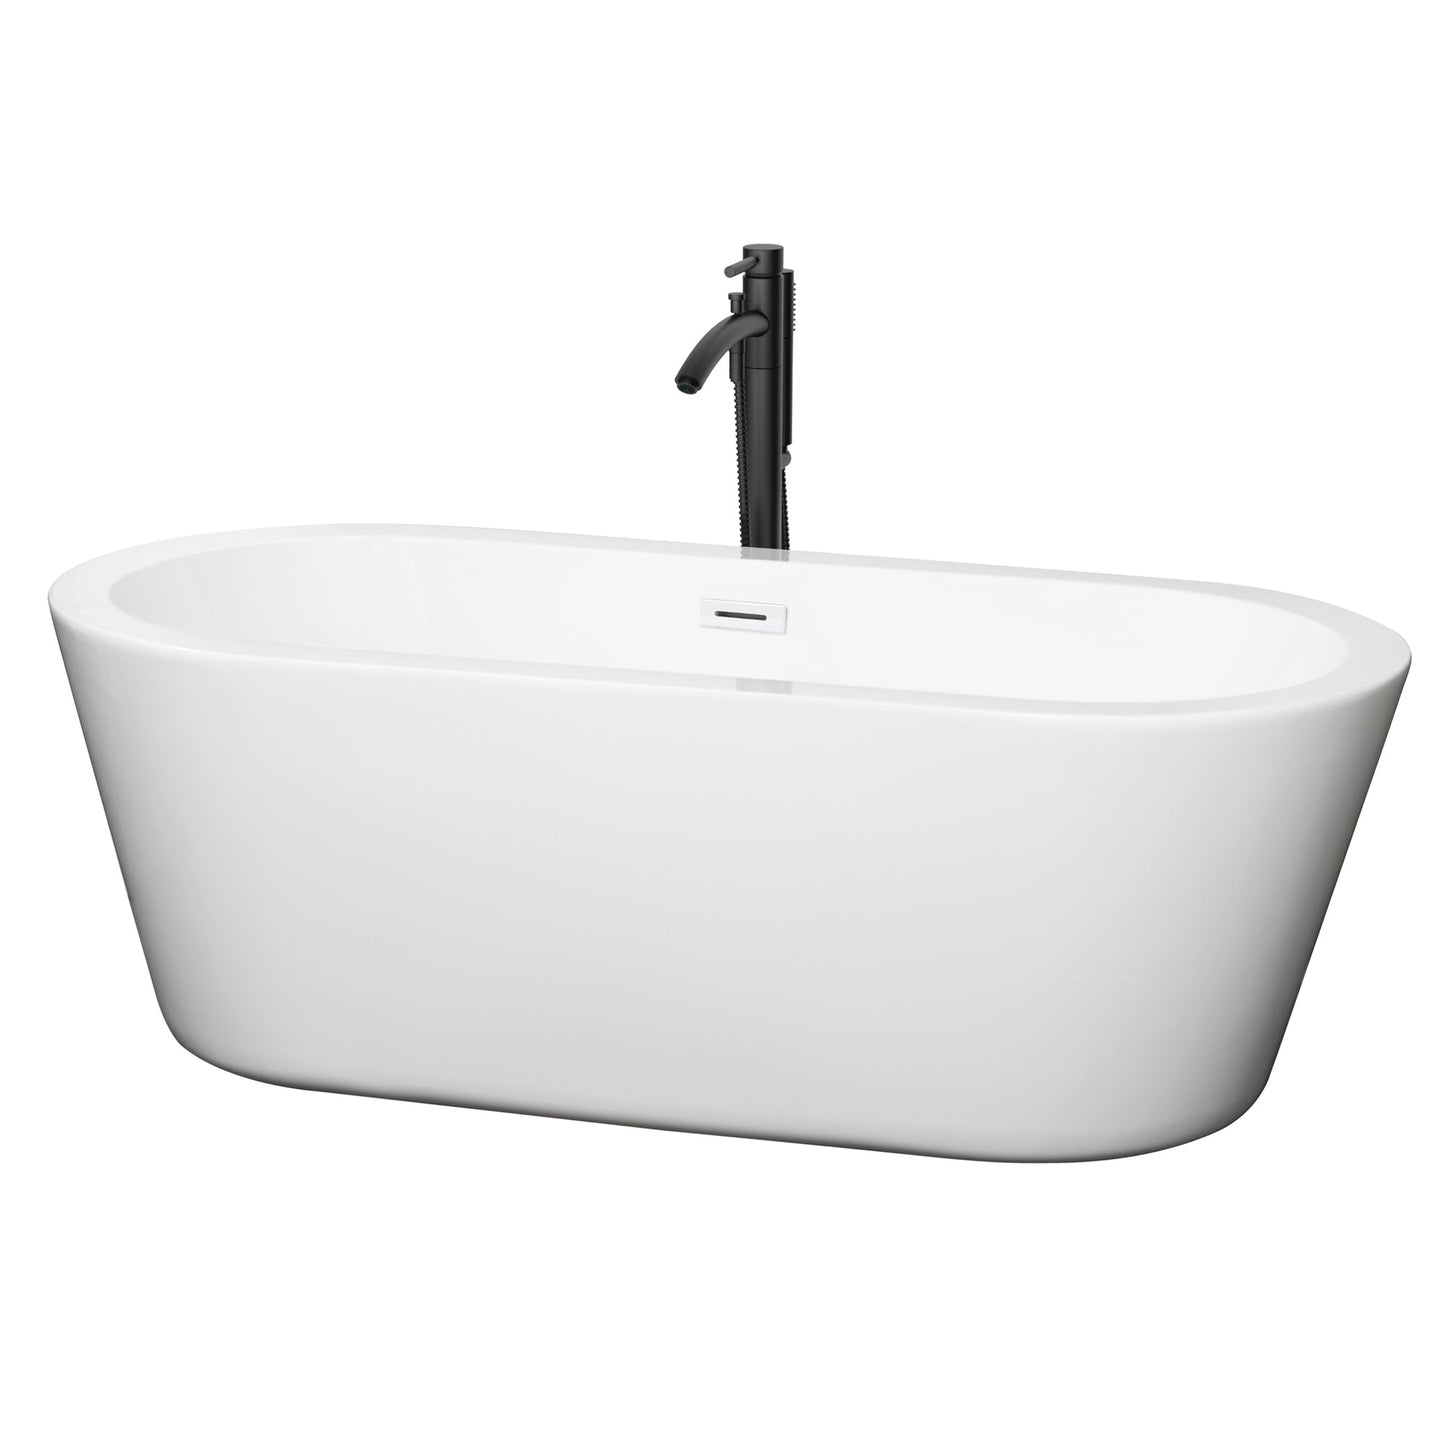 Wyndham Collection Mermaid 67" Freestanding Bathtub in White With Shiny White Trim and Floor Mounted Faucet in Matte Black